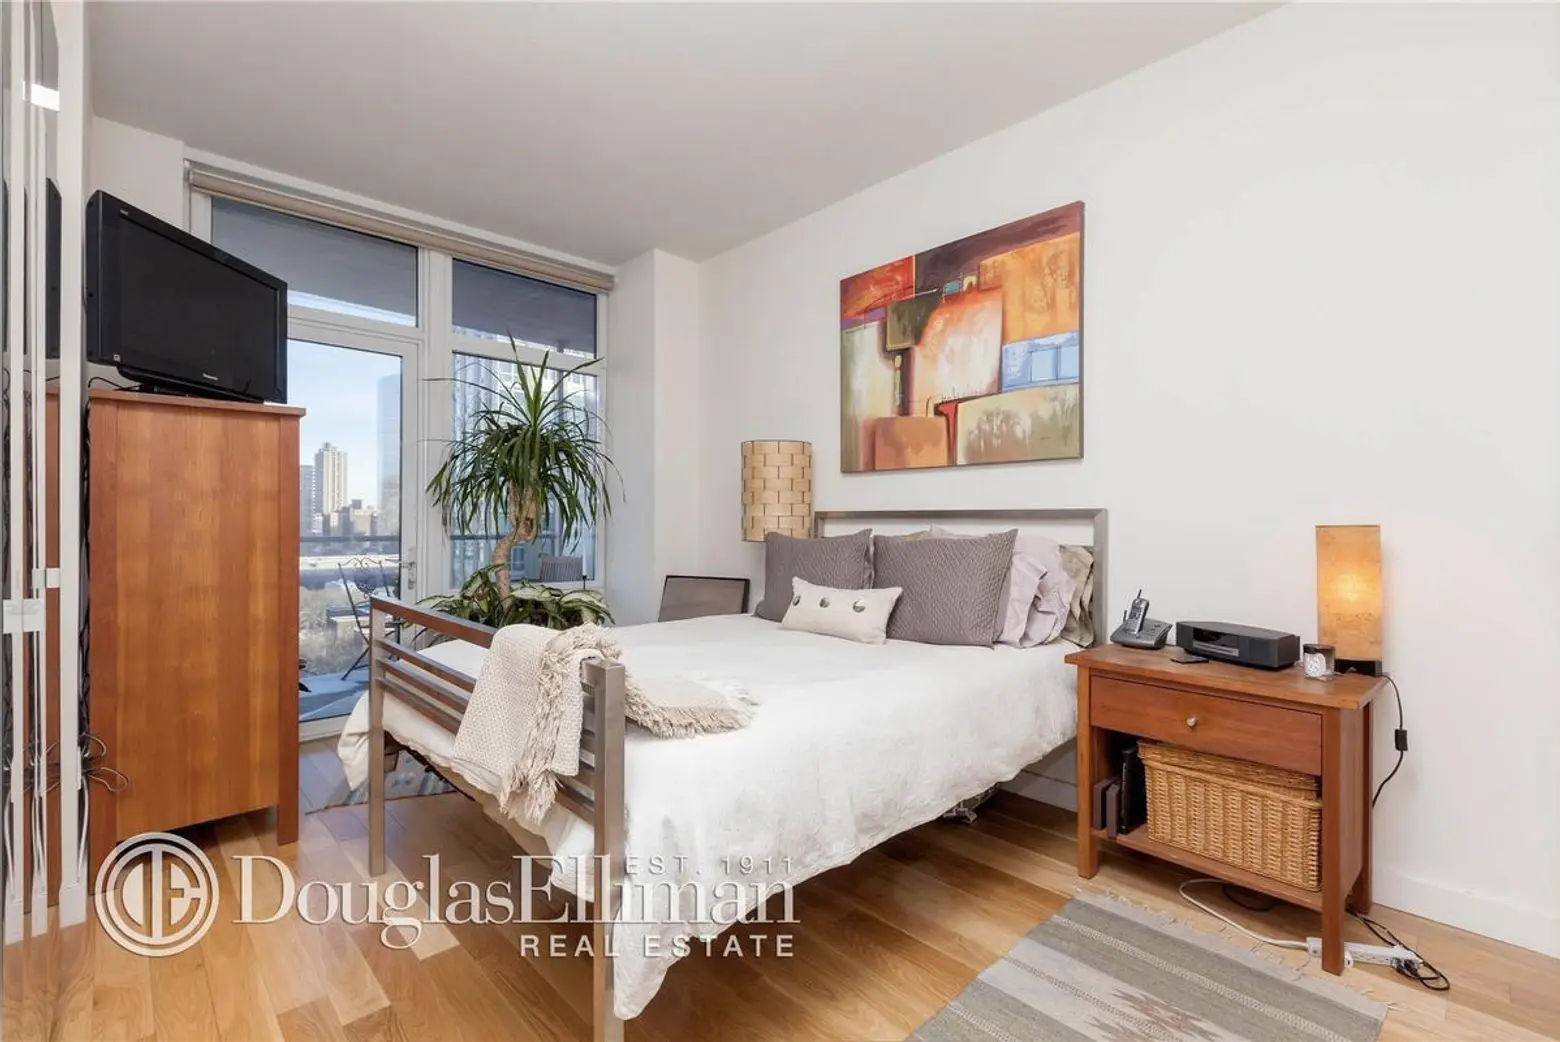 555 west 59th street 18a, isabella rossellini apartment, isabella rossellini nyc address